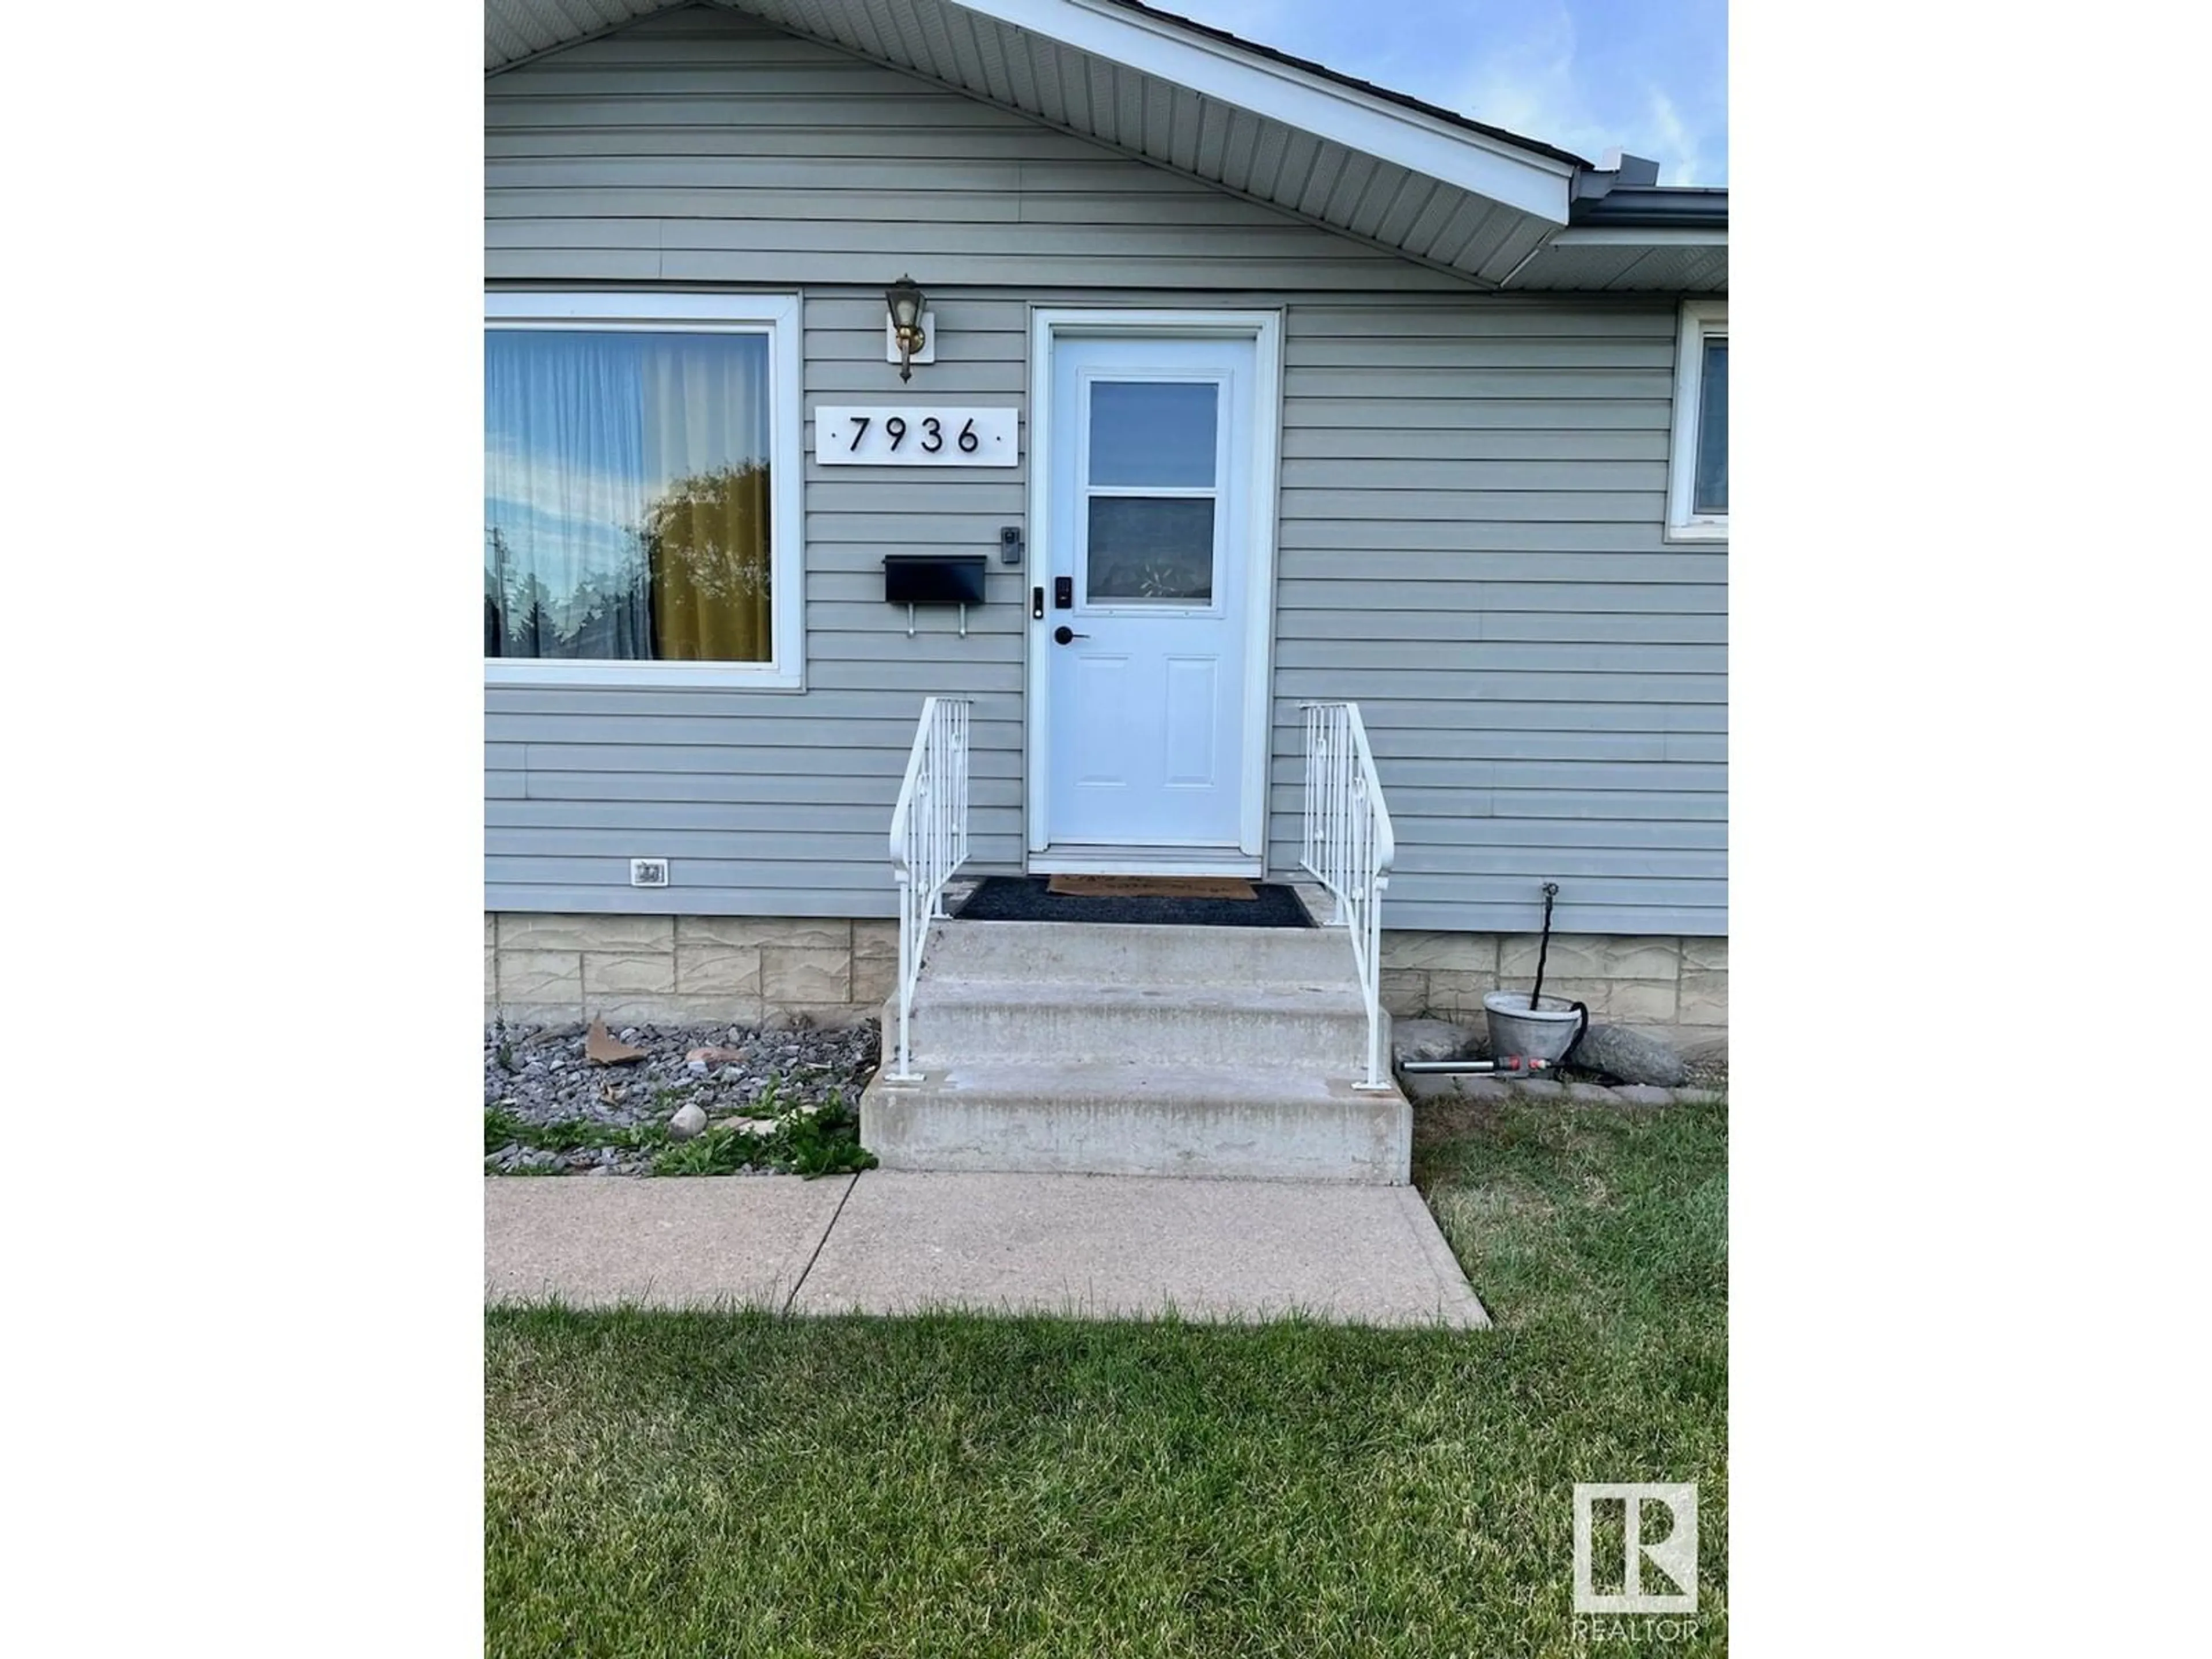 A pic from exterior of the house or condo for 7936 130 AV NW, Edmonton Alberta T5C1Y5